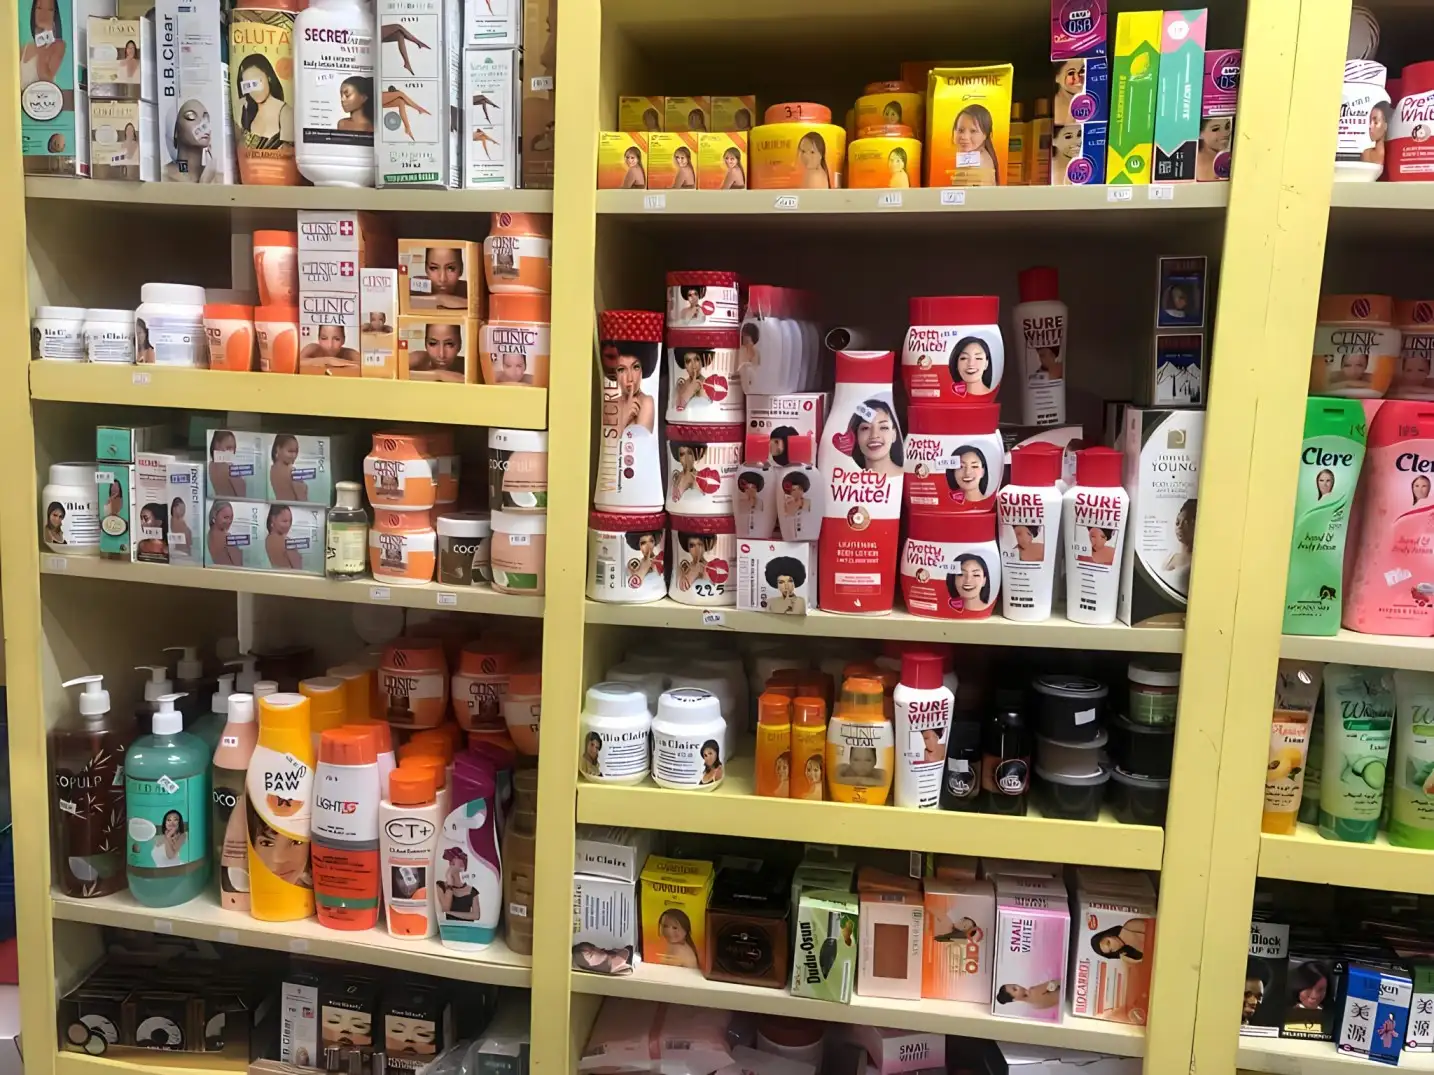 Are you on the lookout for an exceptional collection of cosmetics and beauty products that not only deliver remarkable results but also come at highly affordable prices? Your search ends here at Agape Imports.